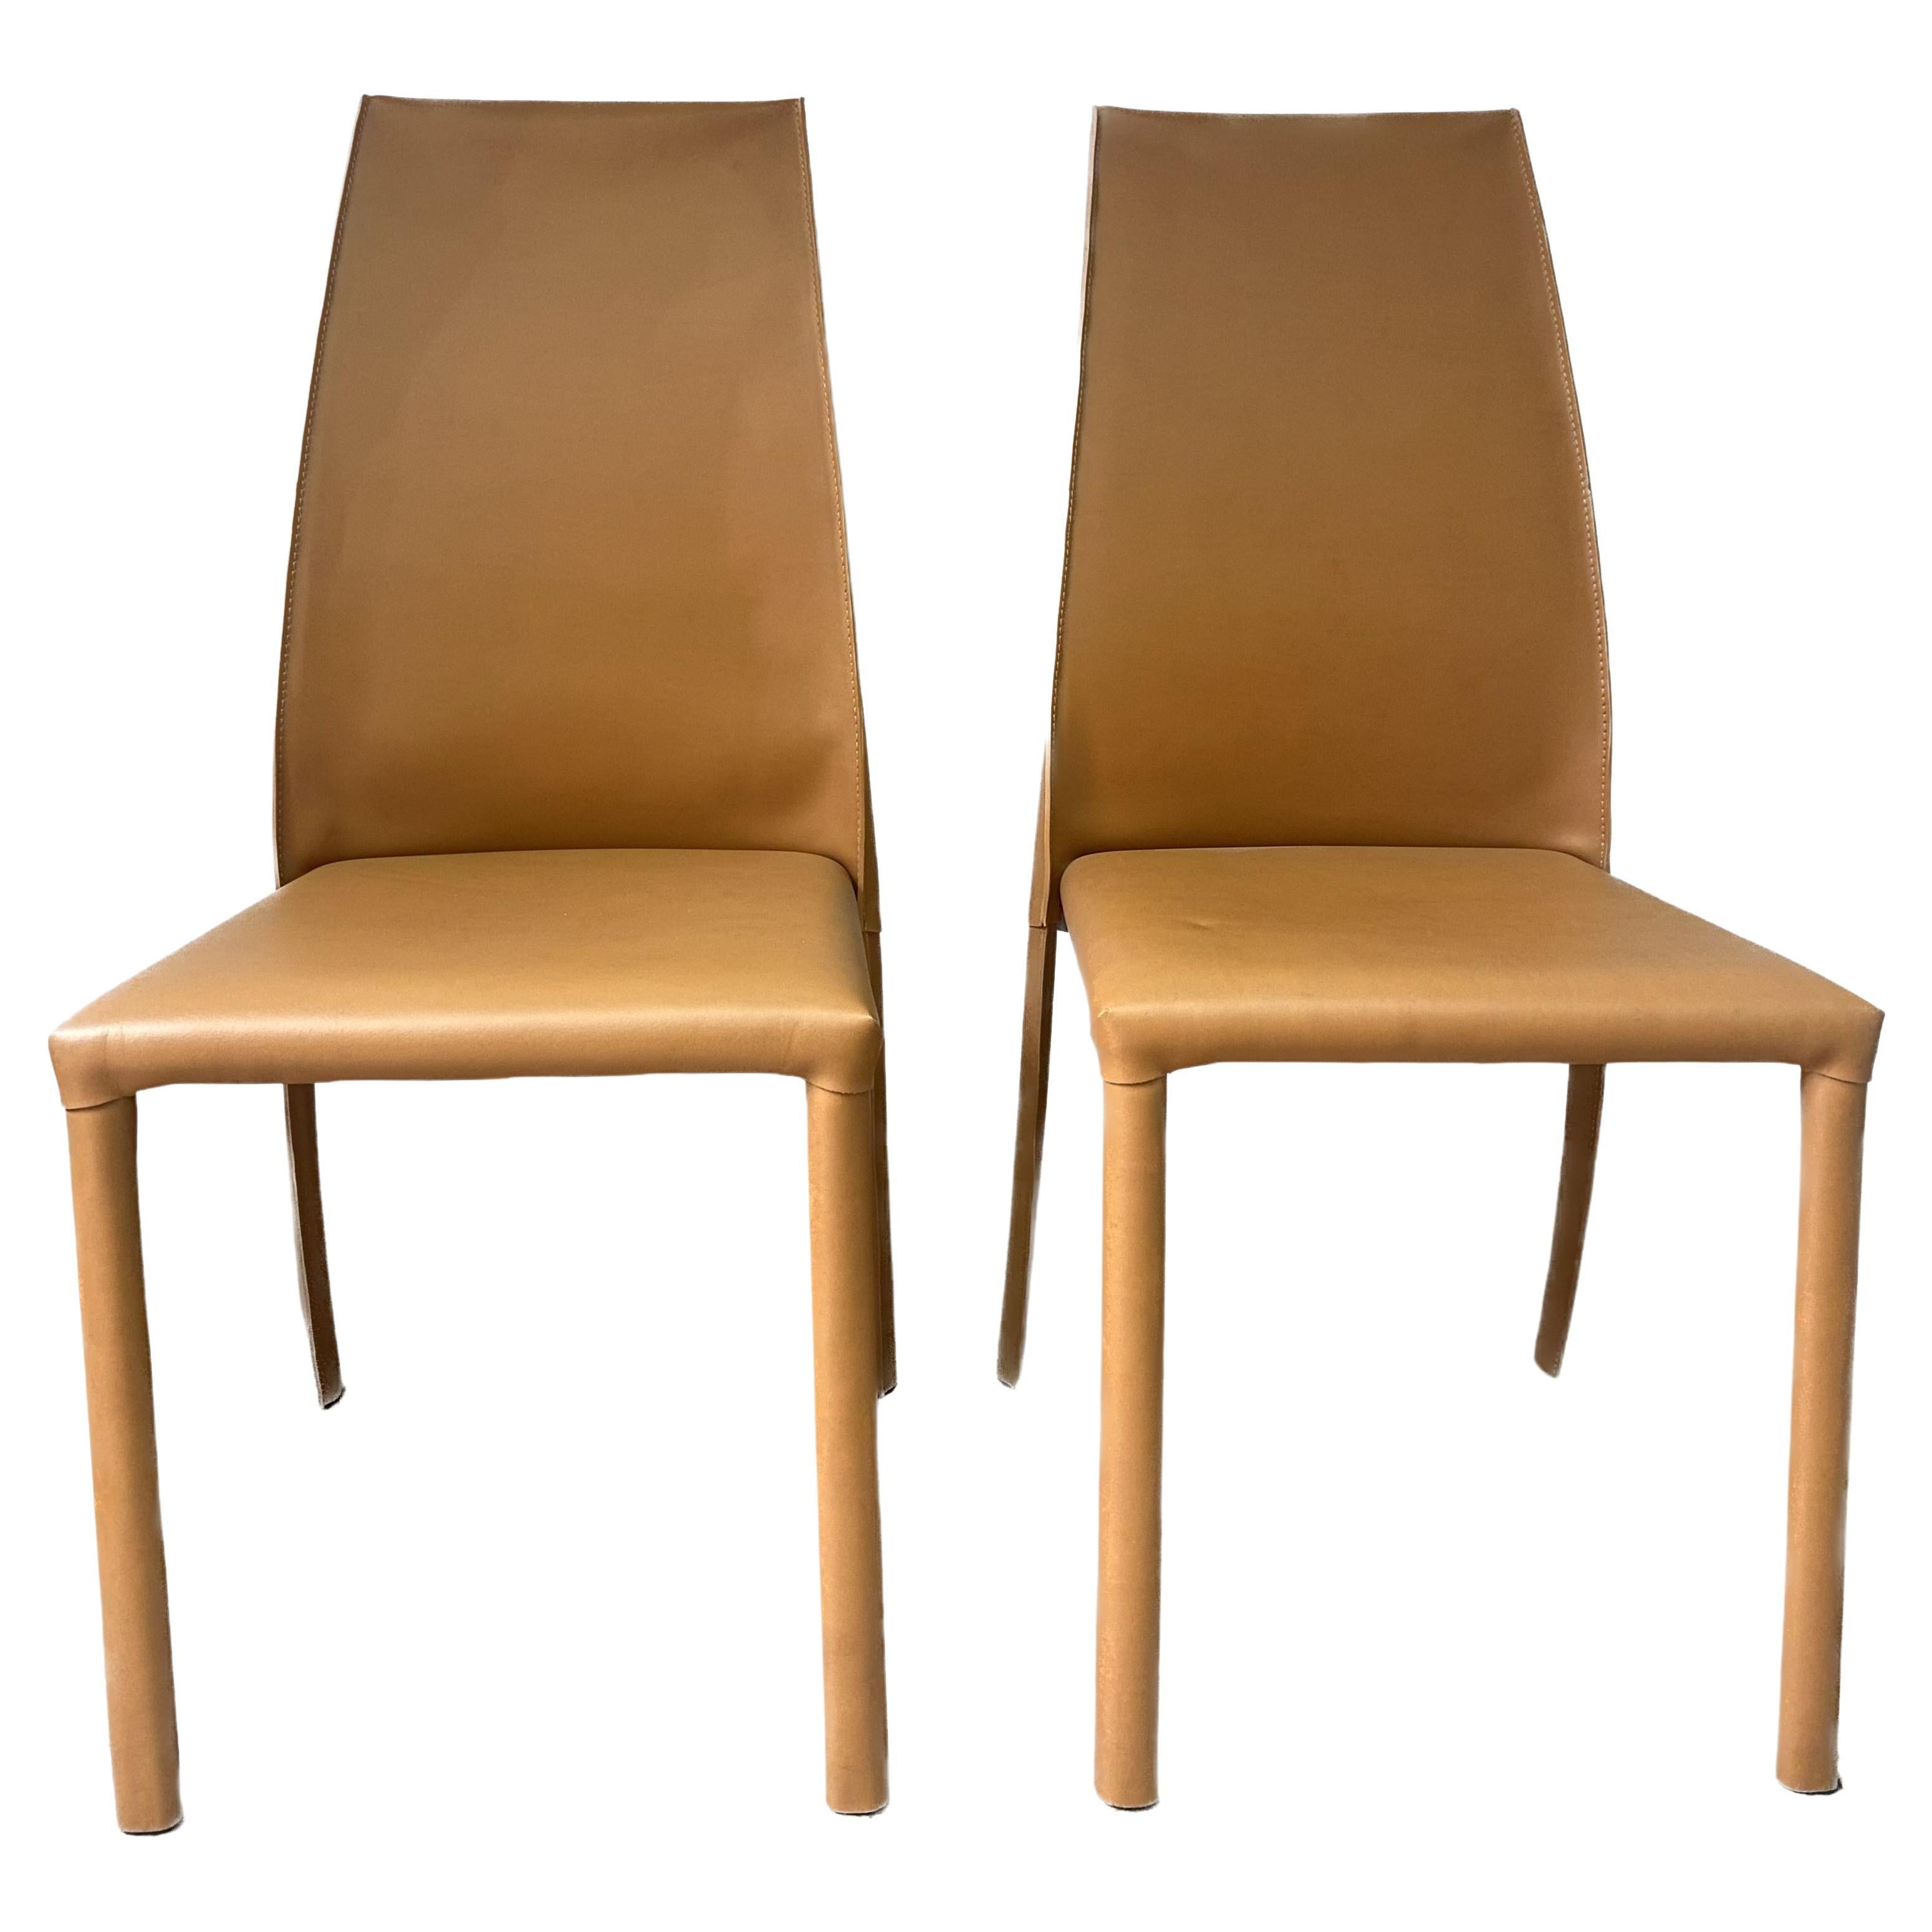 Poltrona Frau, Pair of Frag Chairs Fawn Leather For Sale